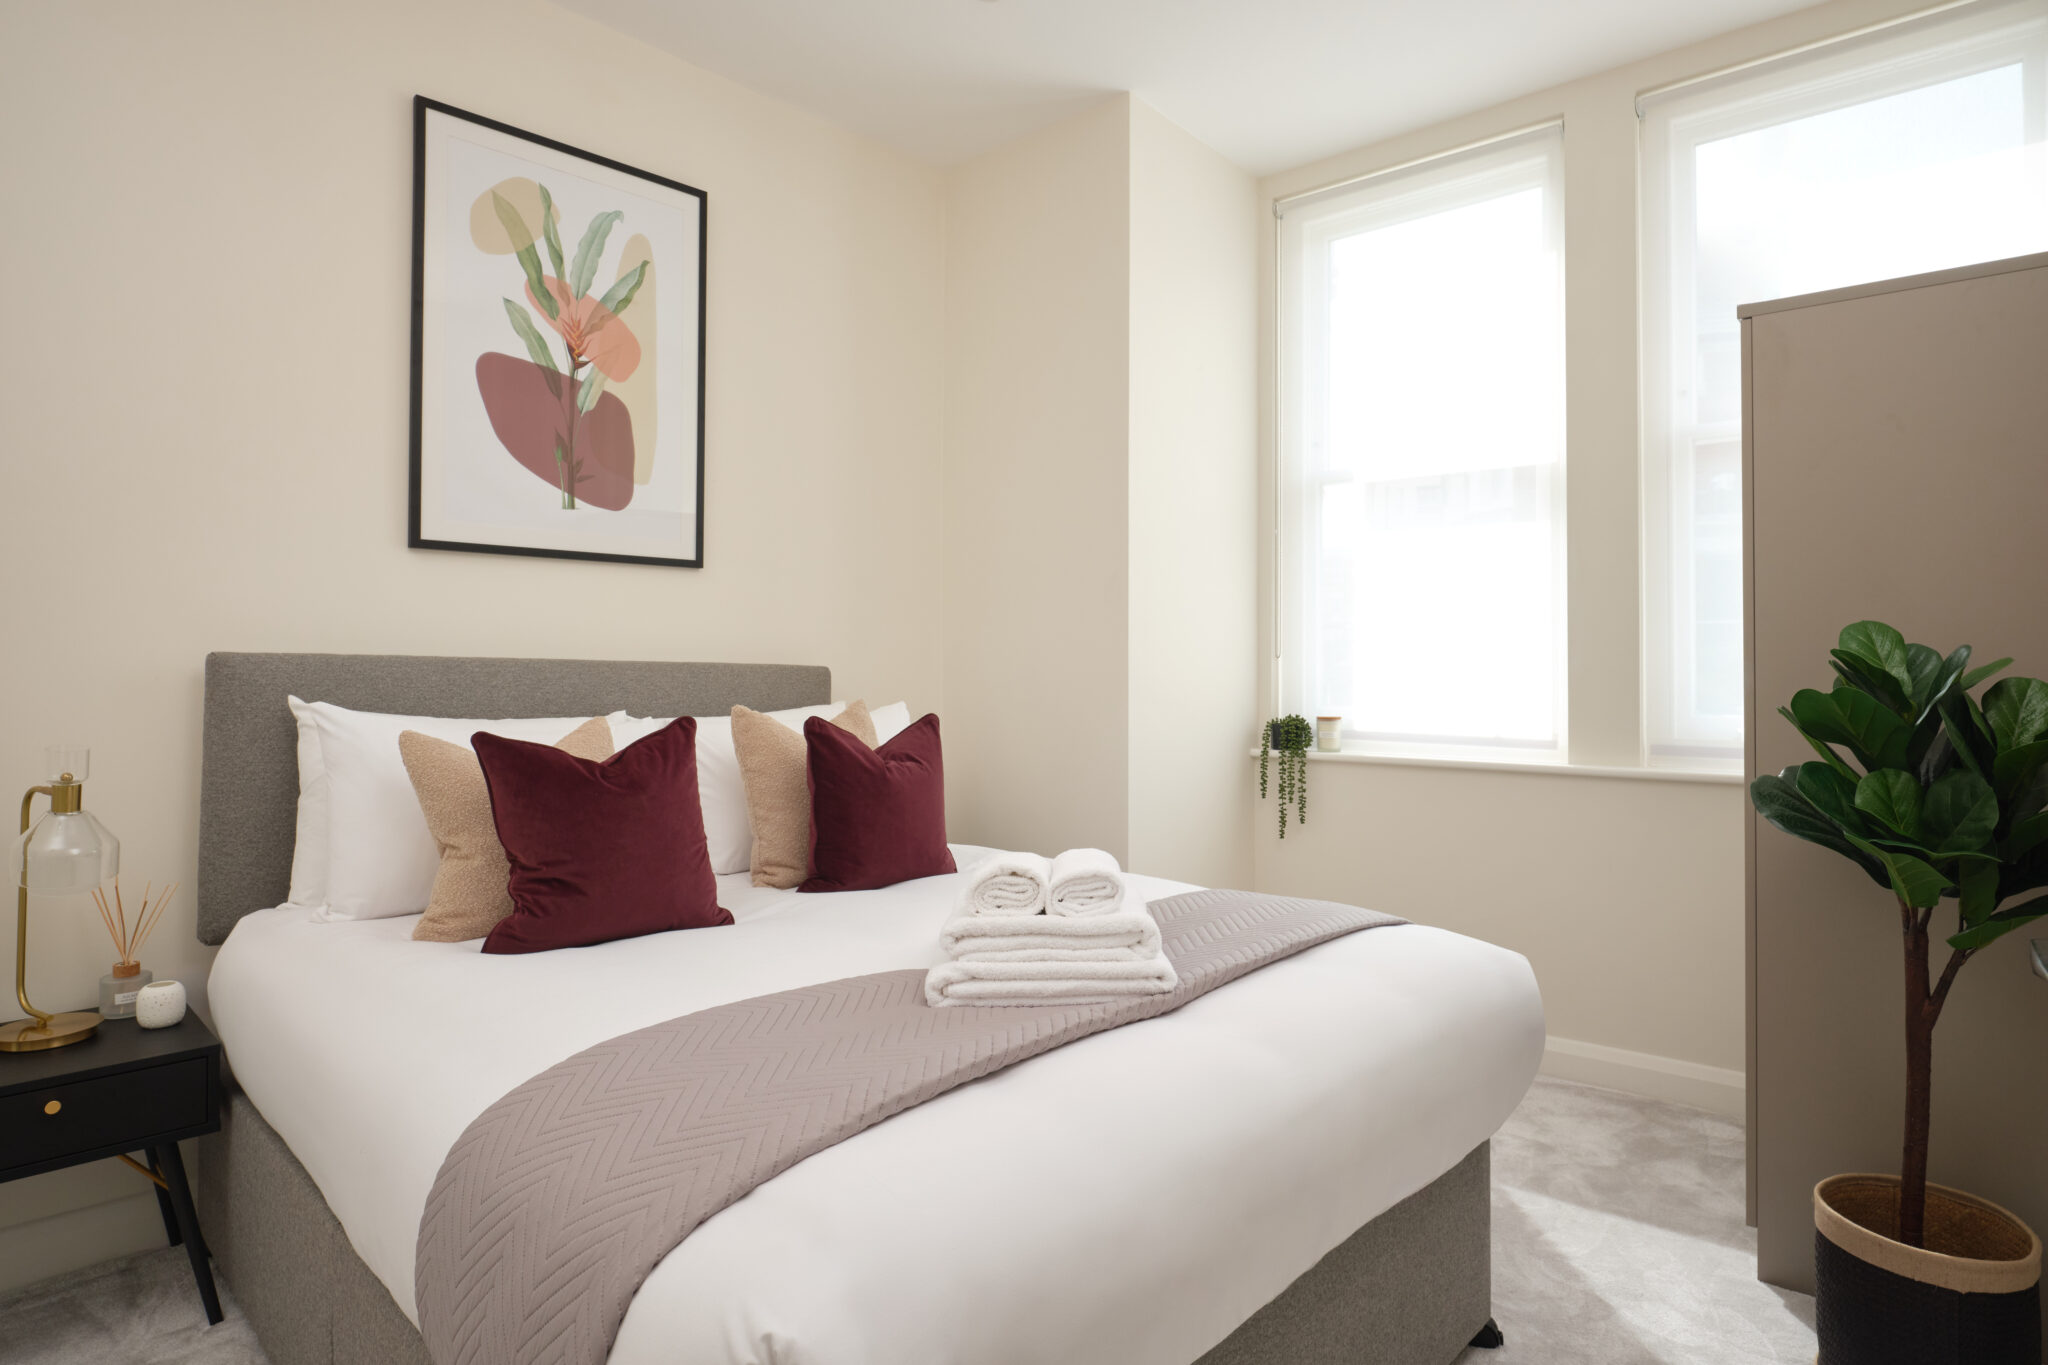 Fulham Palace Apartments - West London Serviced Apartments - London | Urban Stay